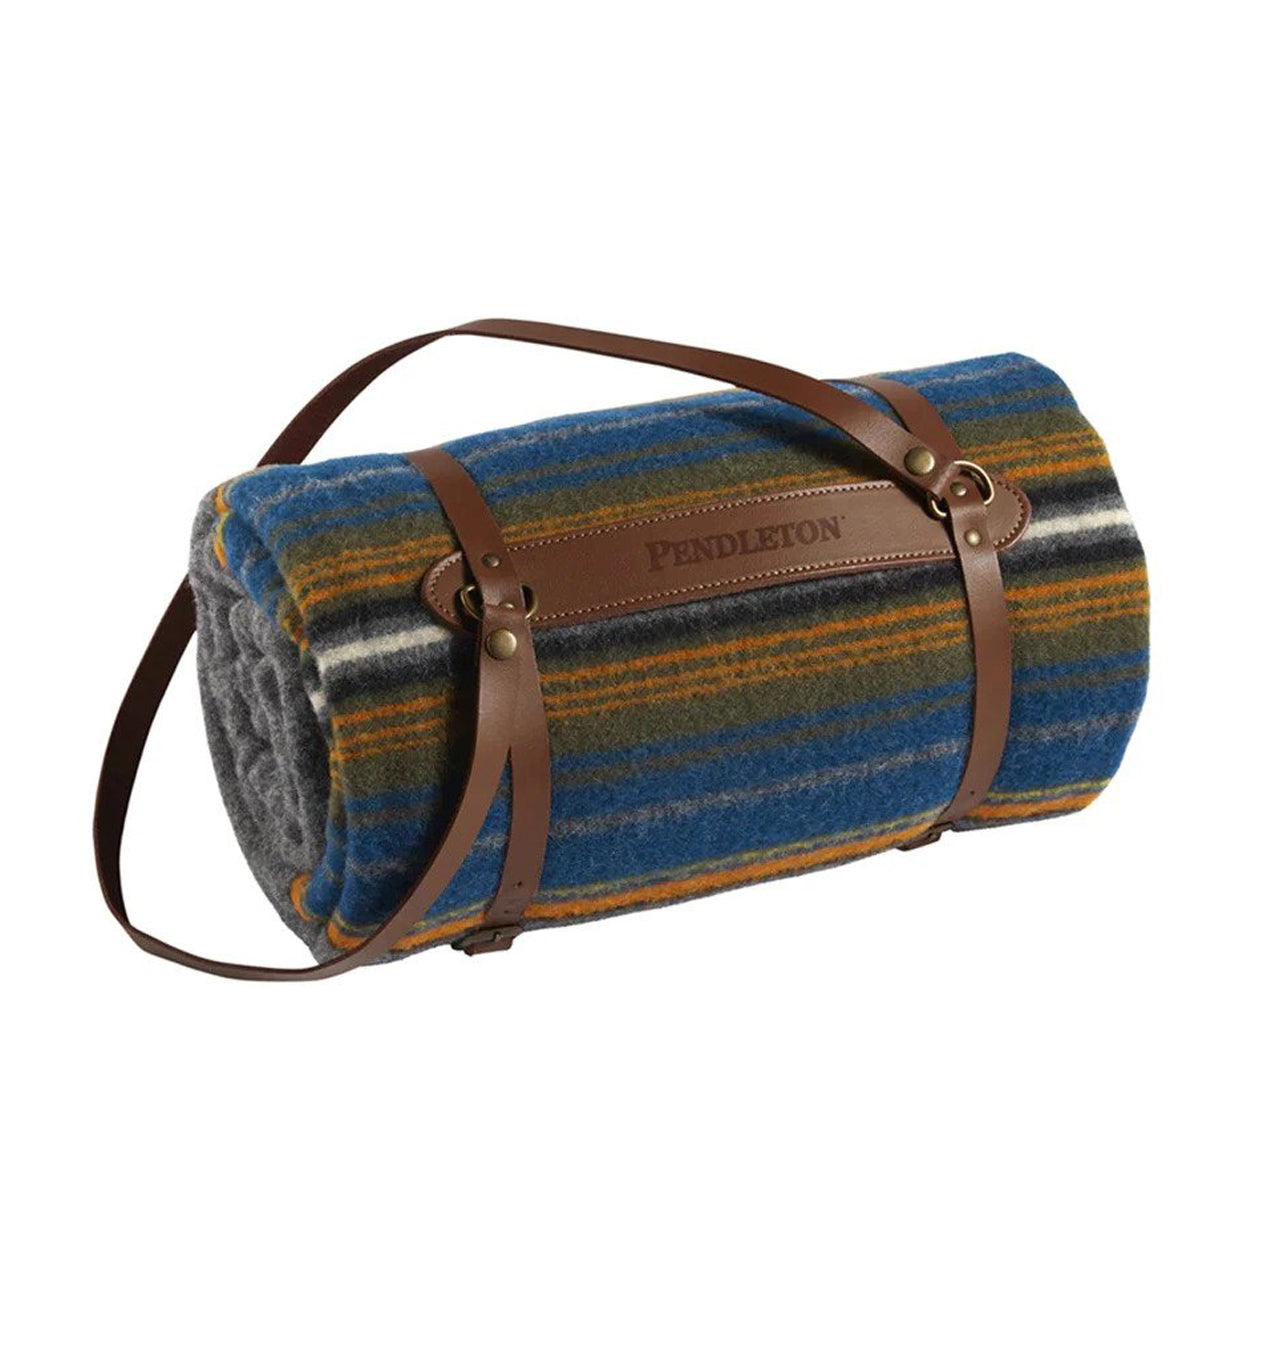 Pendleton Throws with Carriers National Parks Edition